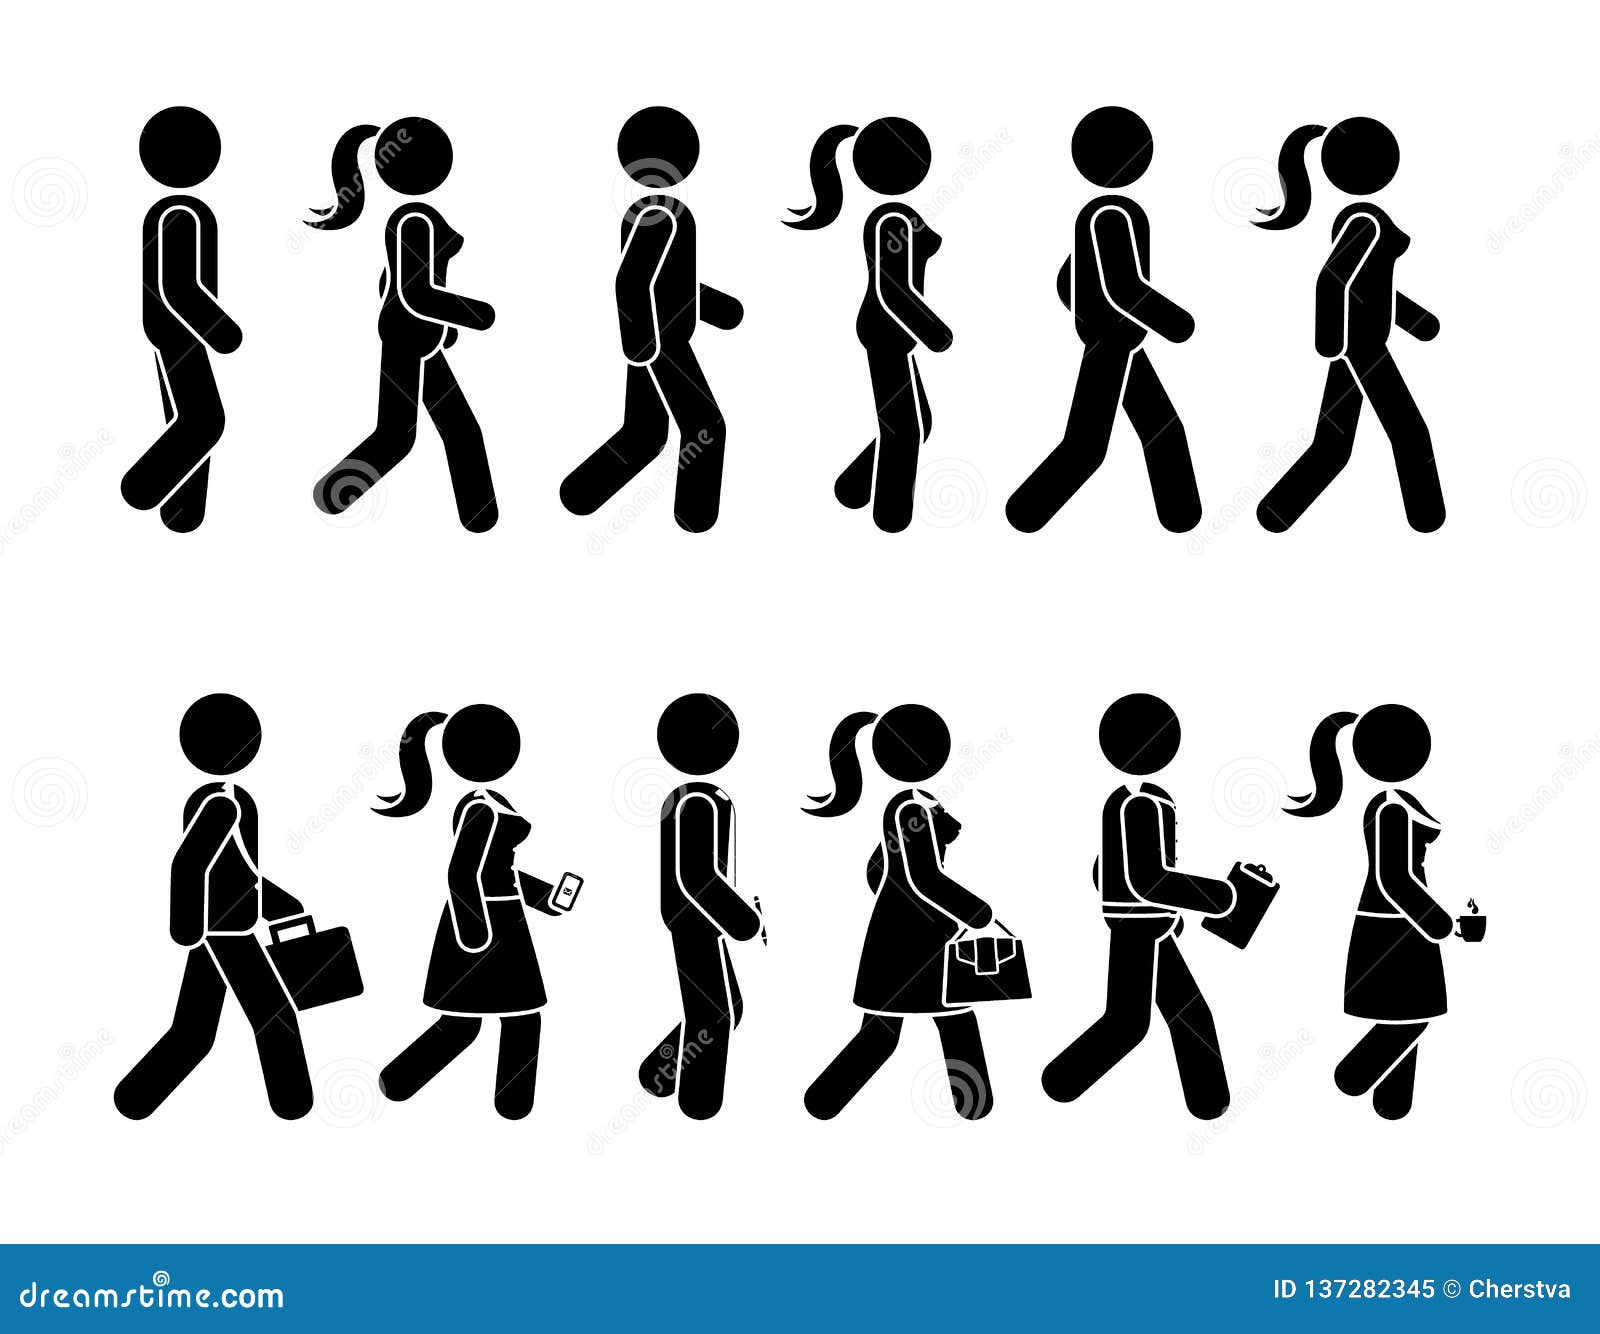 Stick Figure Walking Man and Woman Vector Icon Set. Group of People Moving  Forward Sequence Pictogram. Stock Vector - Illustration of moving, male:  137282345